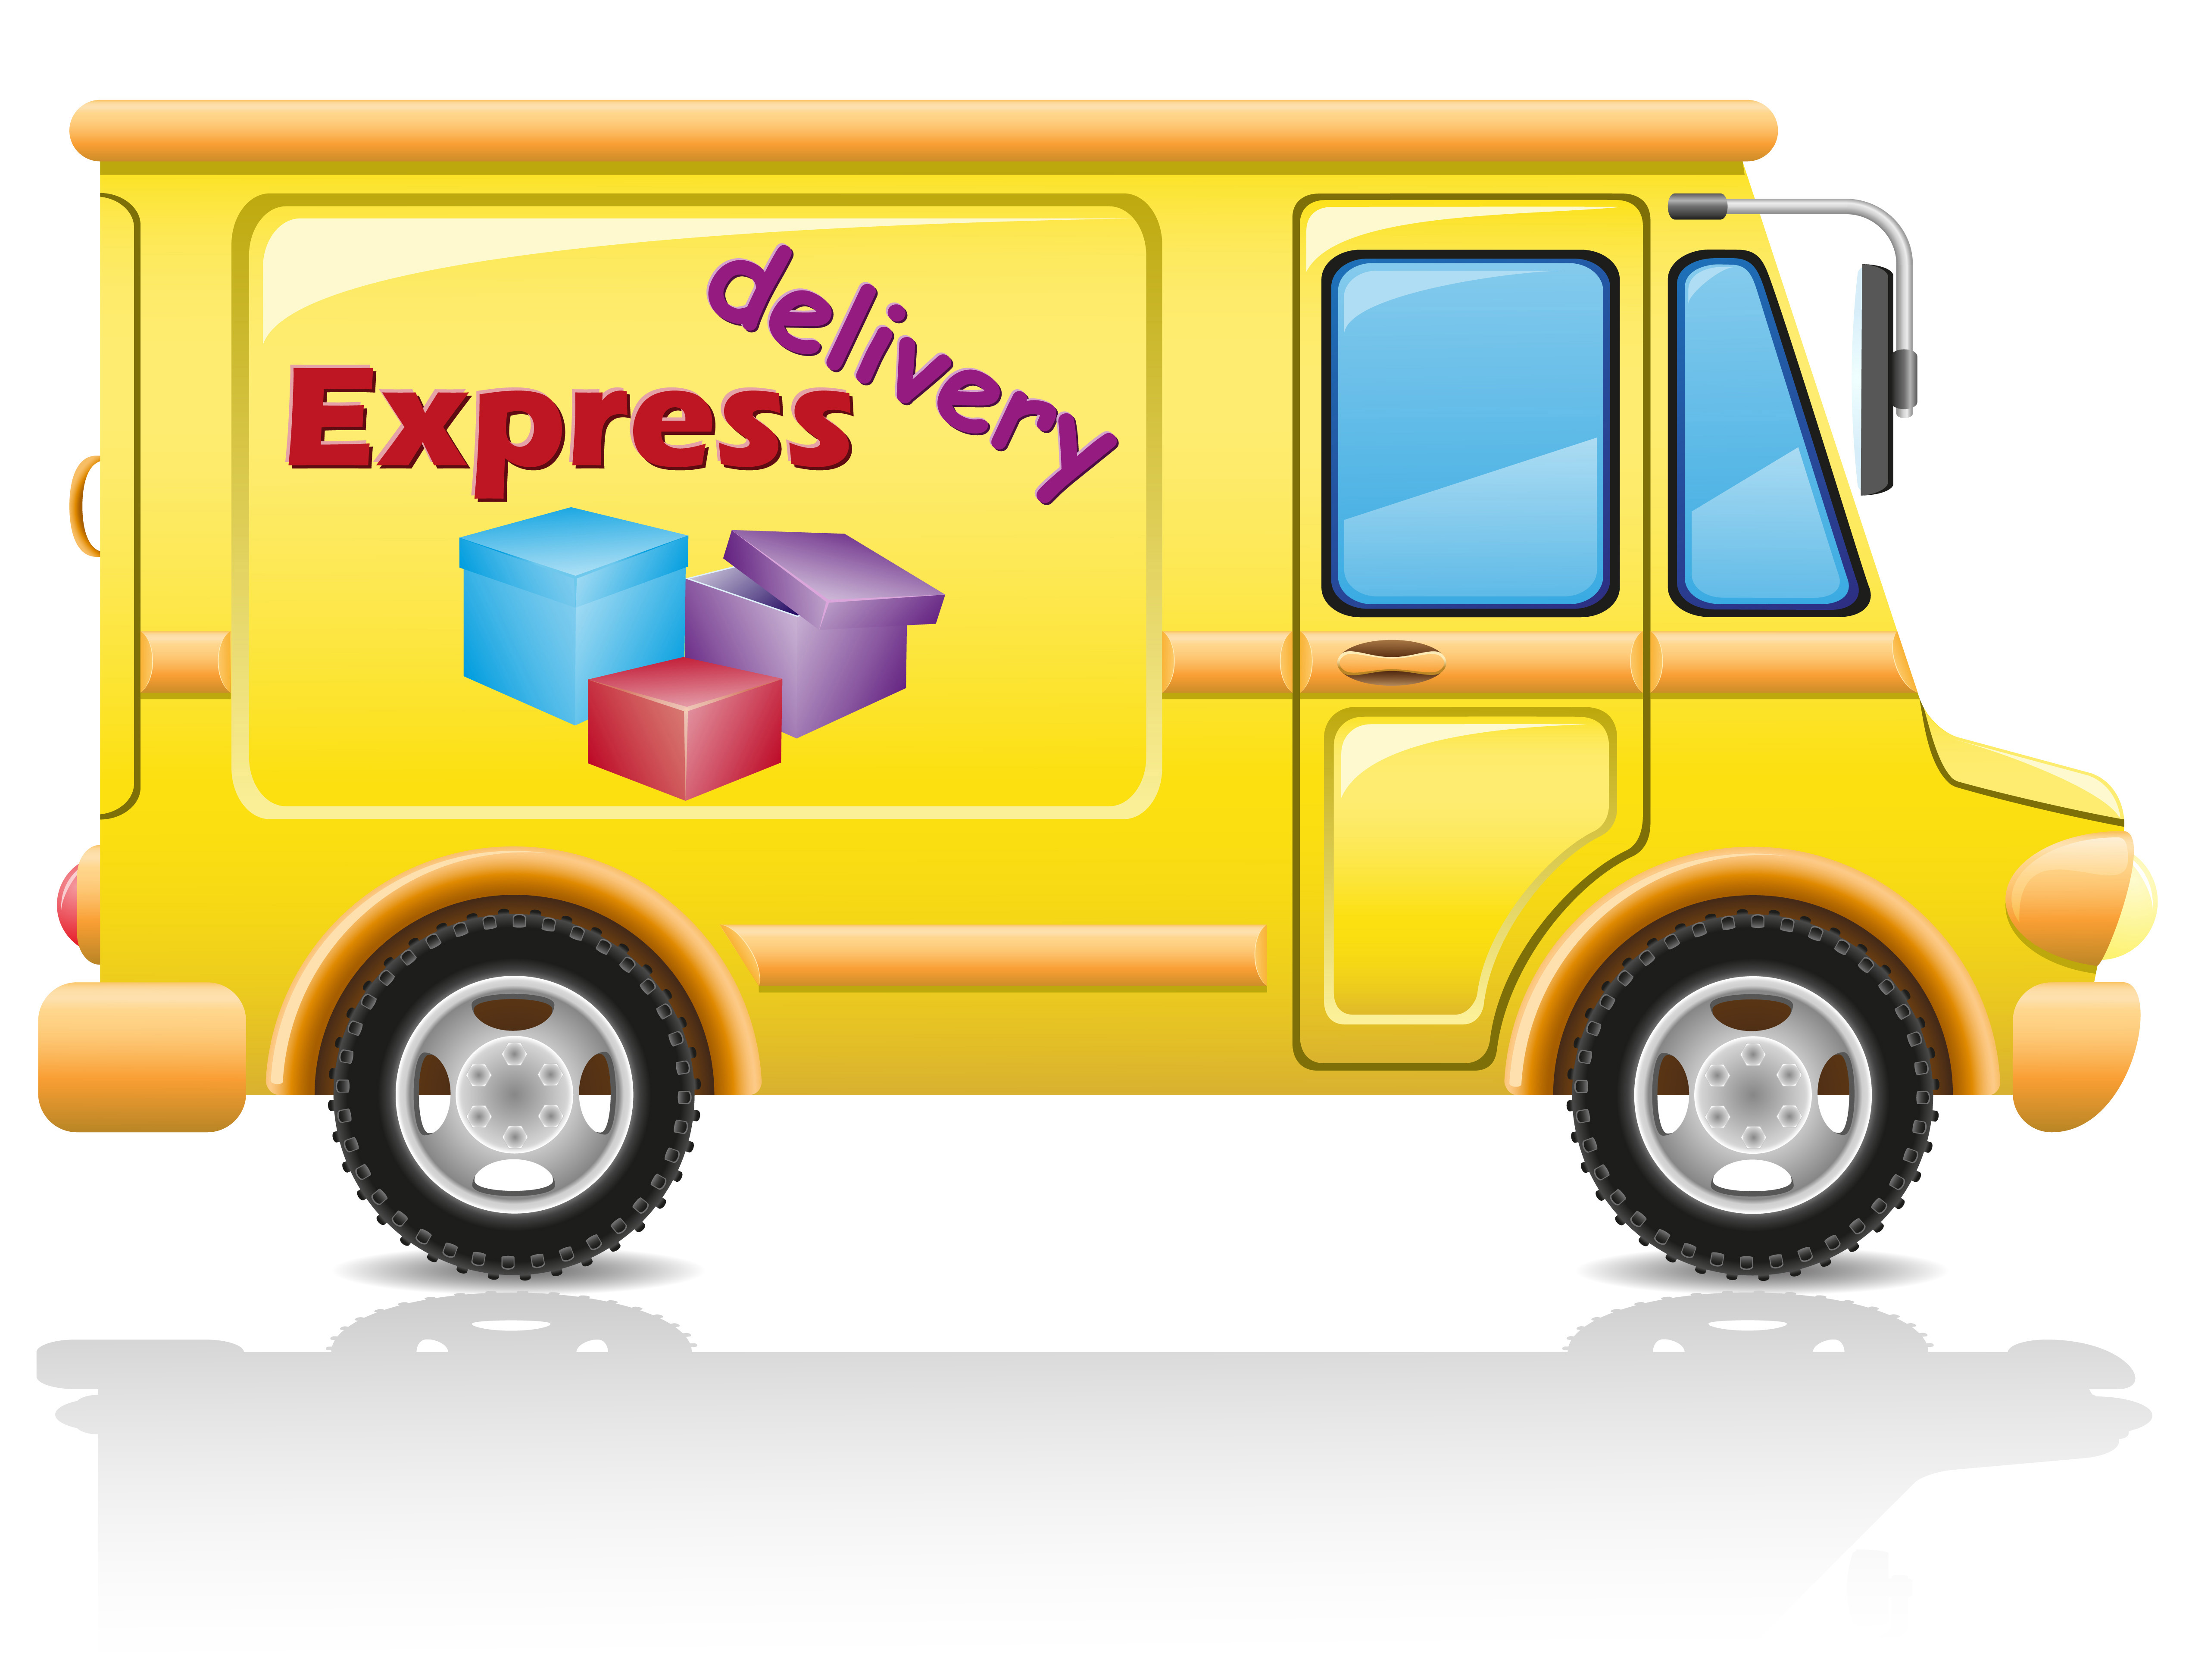 car express delivery of mail and parcels vector illustration isolated on wh...